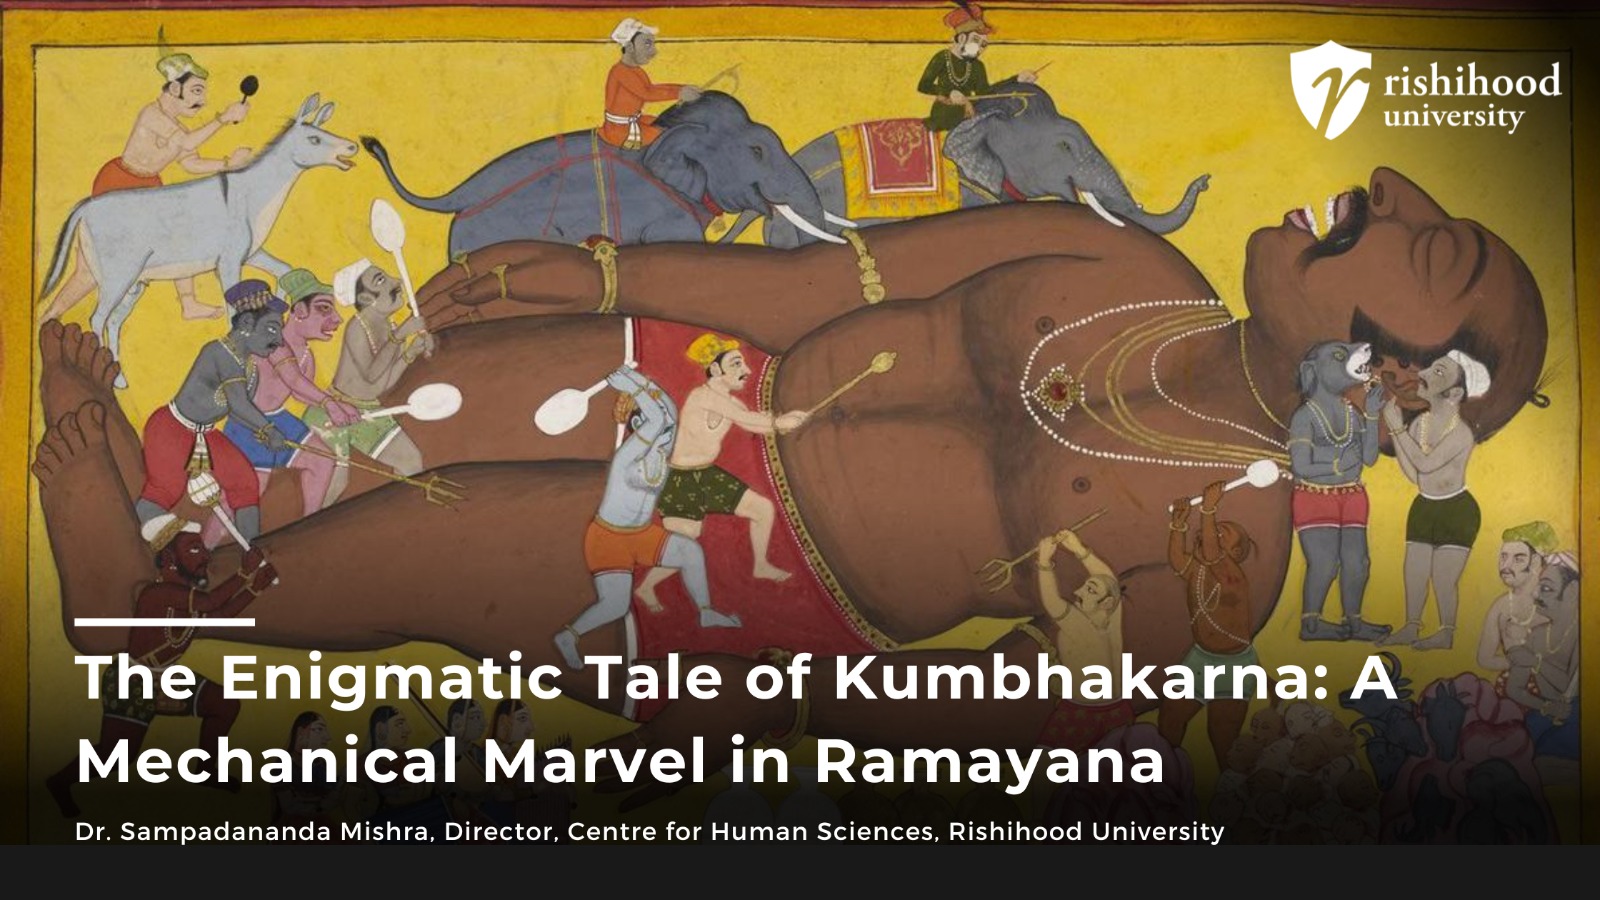 The Enigmatic Tale of Kumbhakarna: A Mechanical Marvel in Ramayana